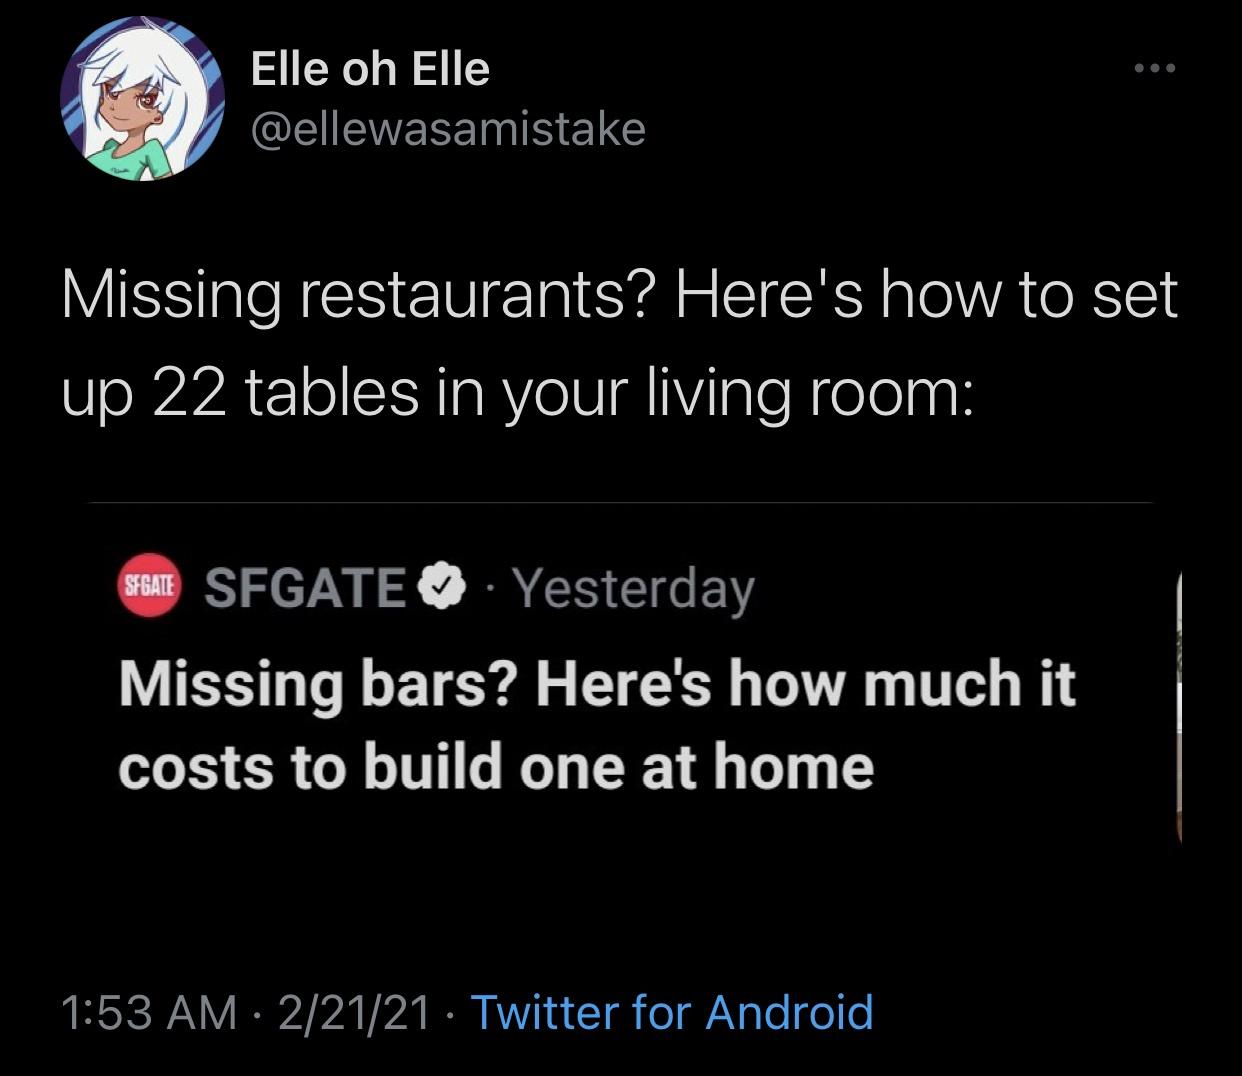 atmosphere - Elle oh Elle Missing restaurants? Here's how to set up 22 tables in your living room Suit Sfgate Yesterday Missing bars? Here's how much it costs to build one at home 22121 Twitter for Android